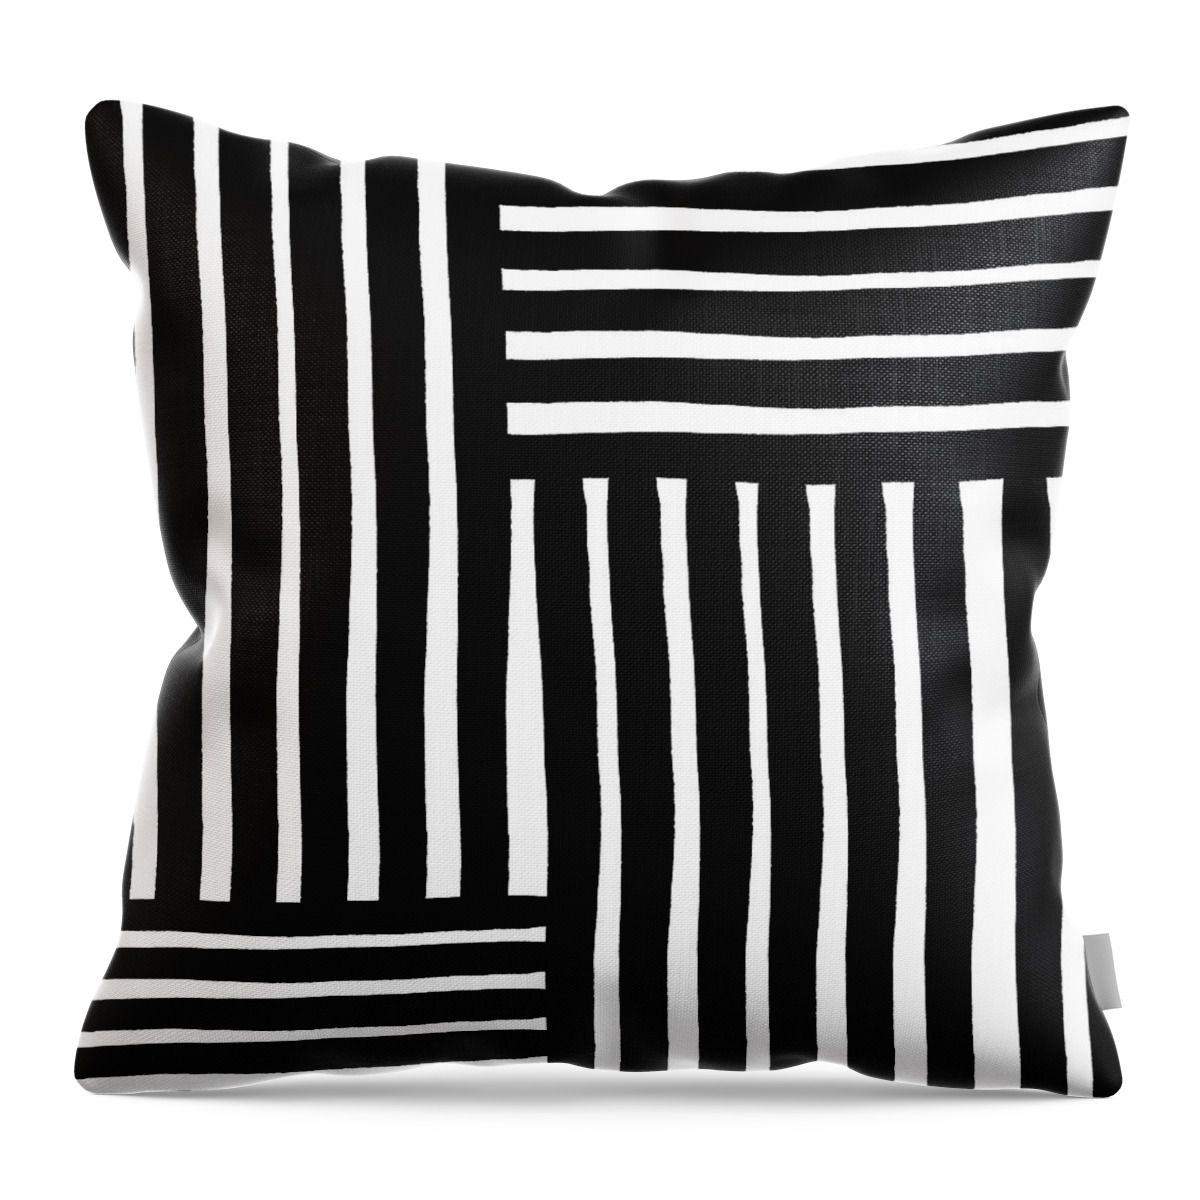 Modern Throw Pillow featuring the digital art Connecting Stripes- Art by Linda Woods by Linda Woods